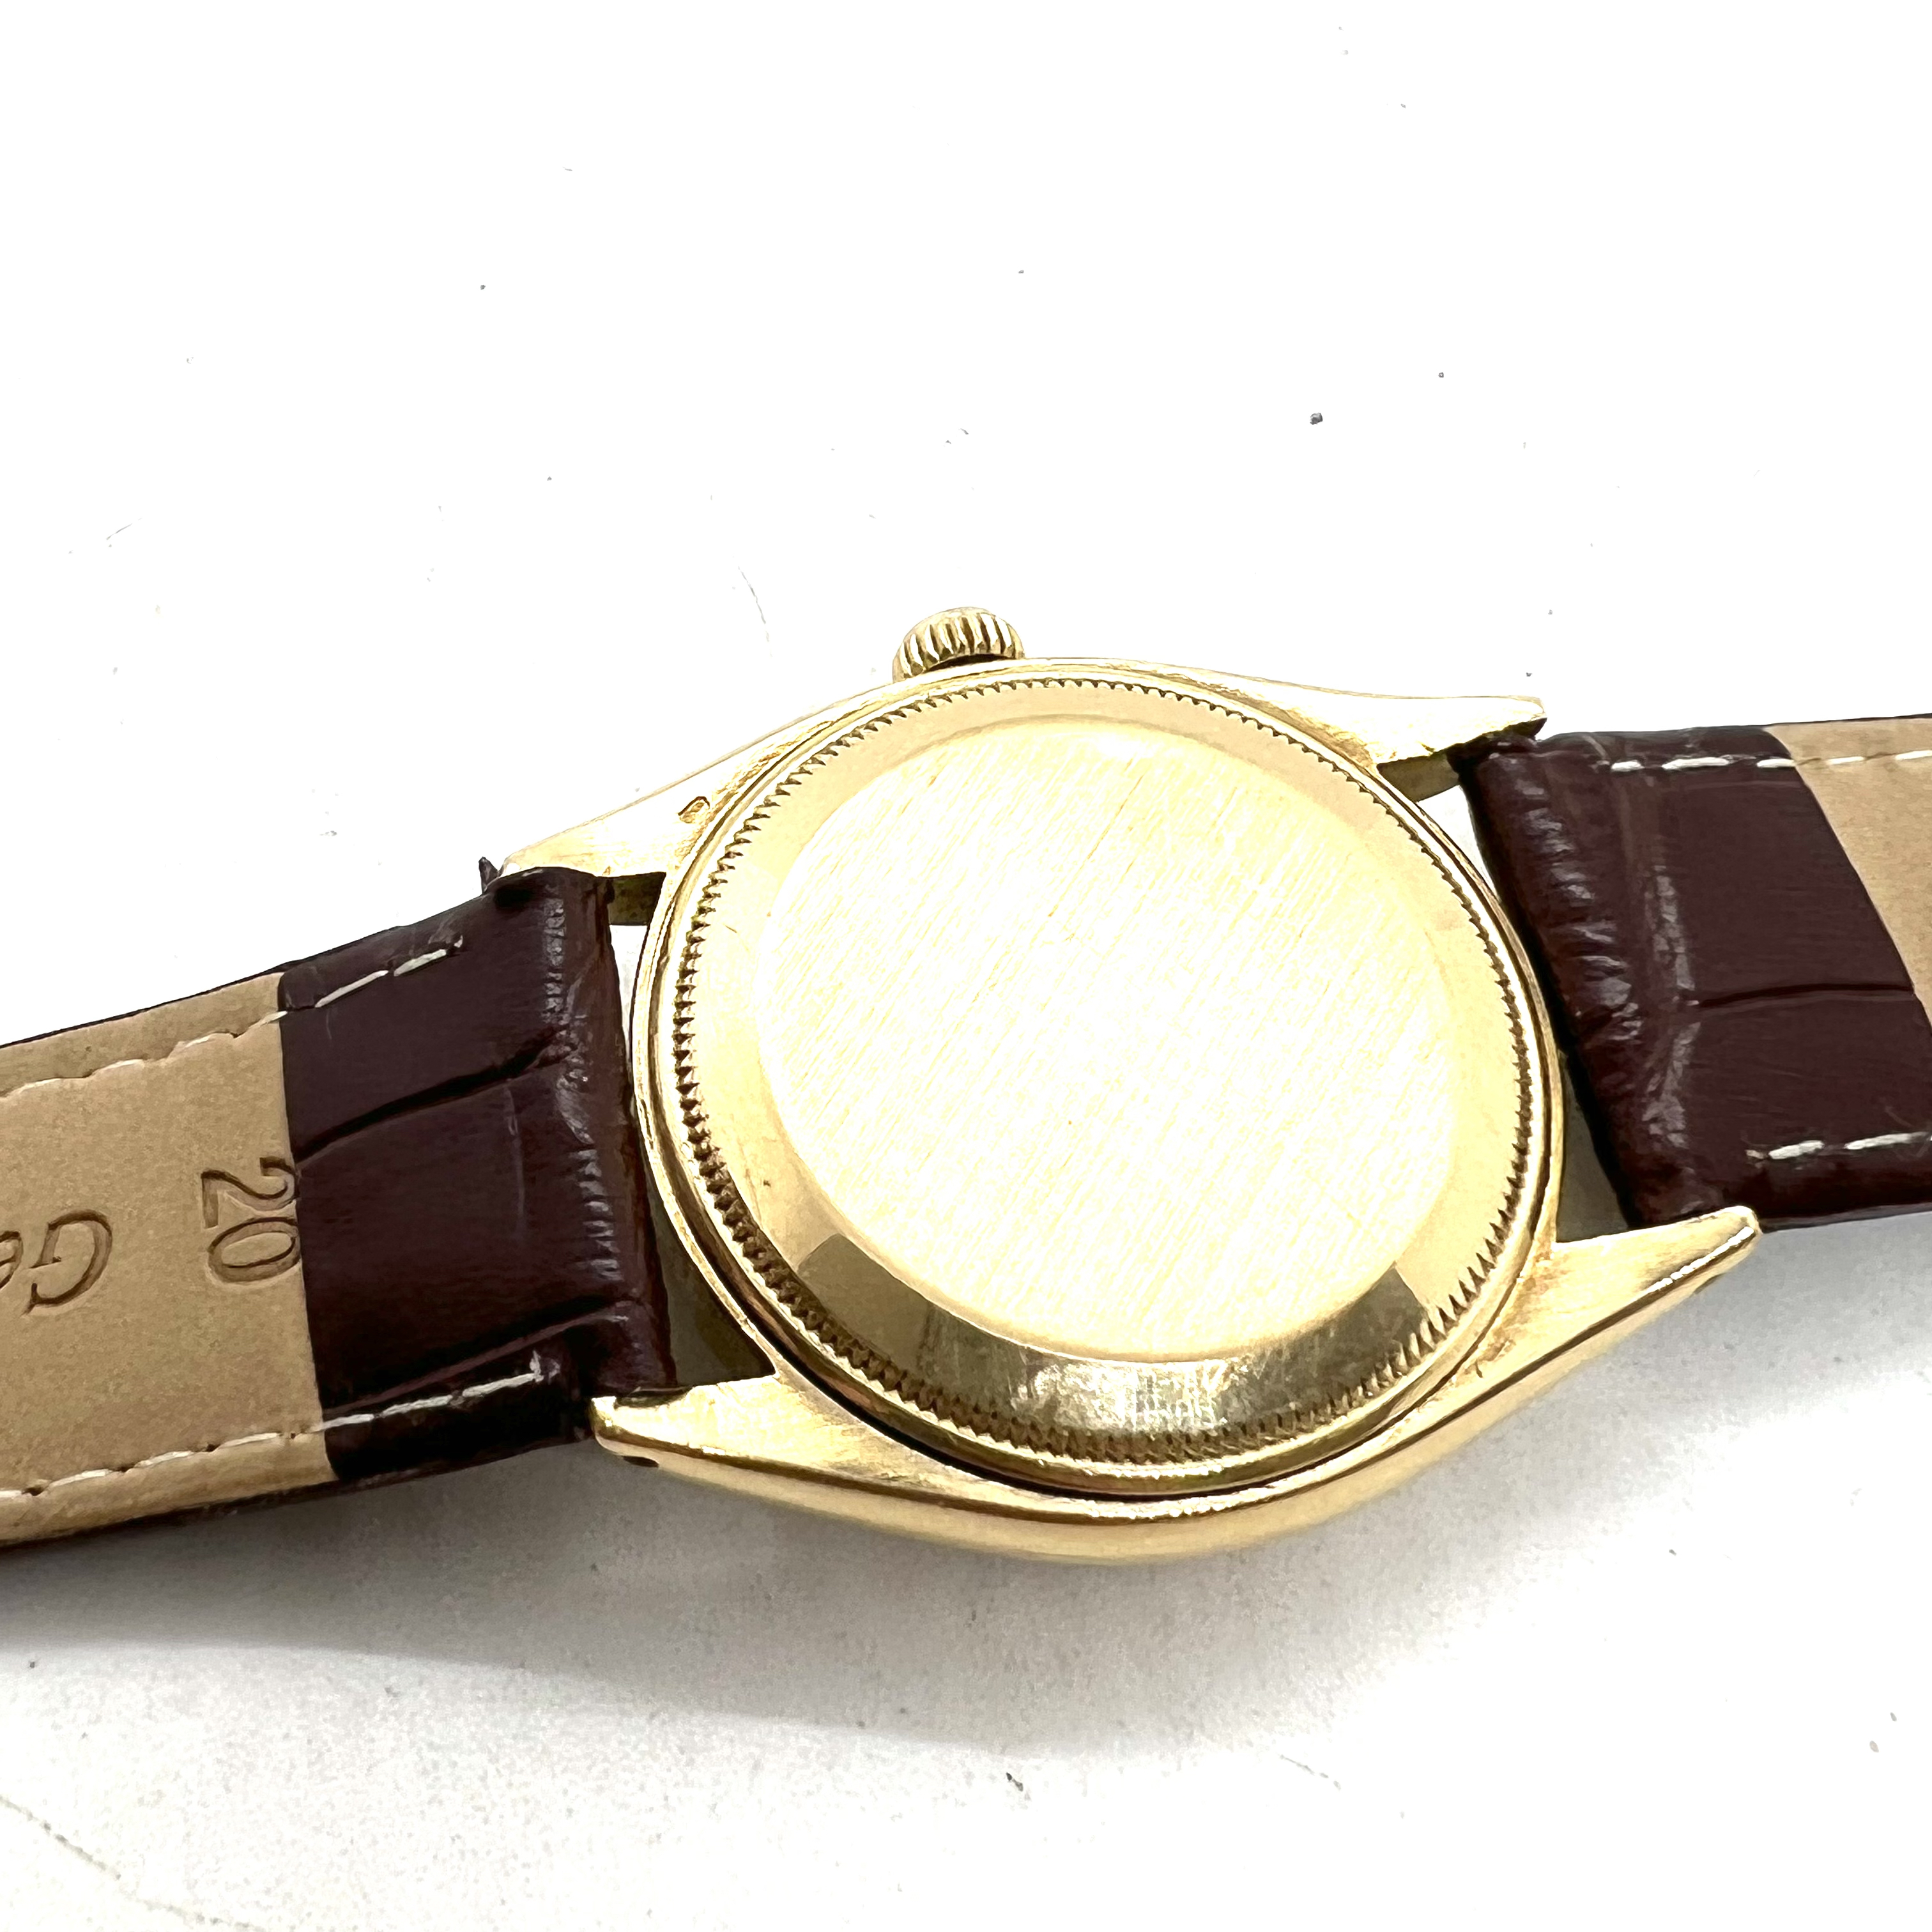 VINTAGE 18CT ROLEX REFERENCE 6567 CIRCA 1967 - Image 3 of 7